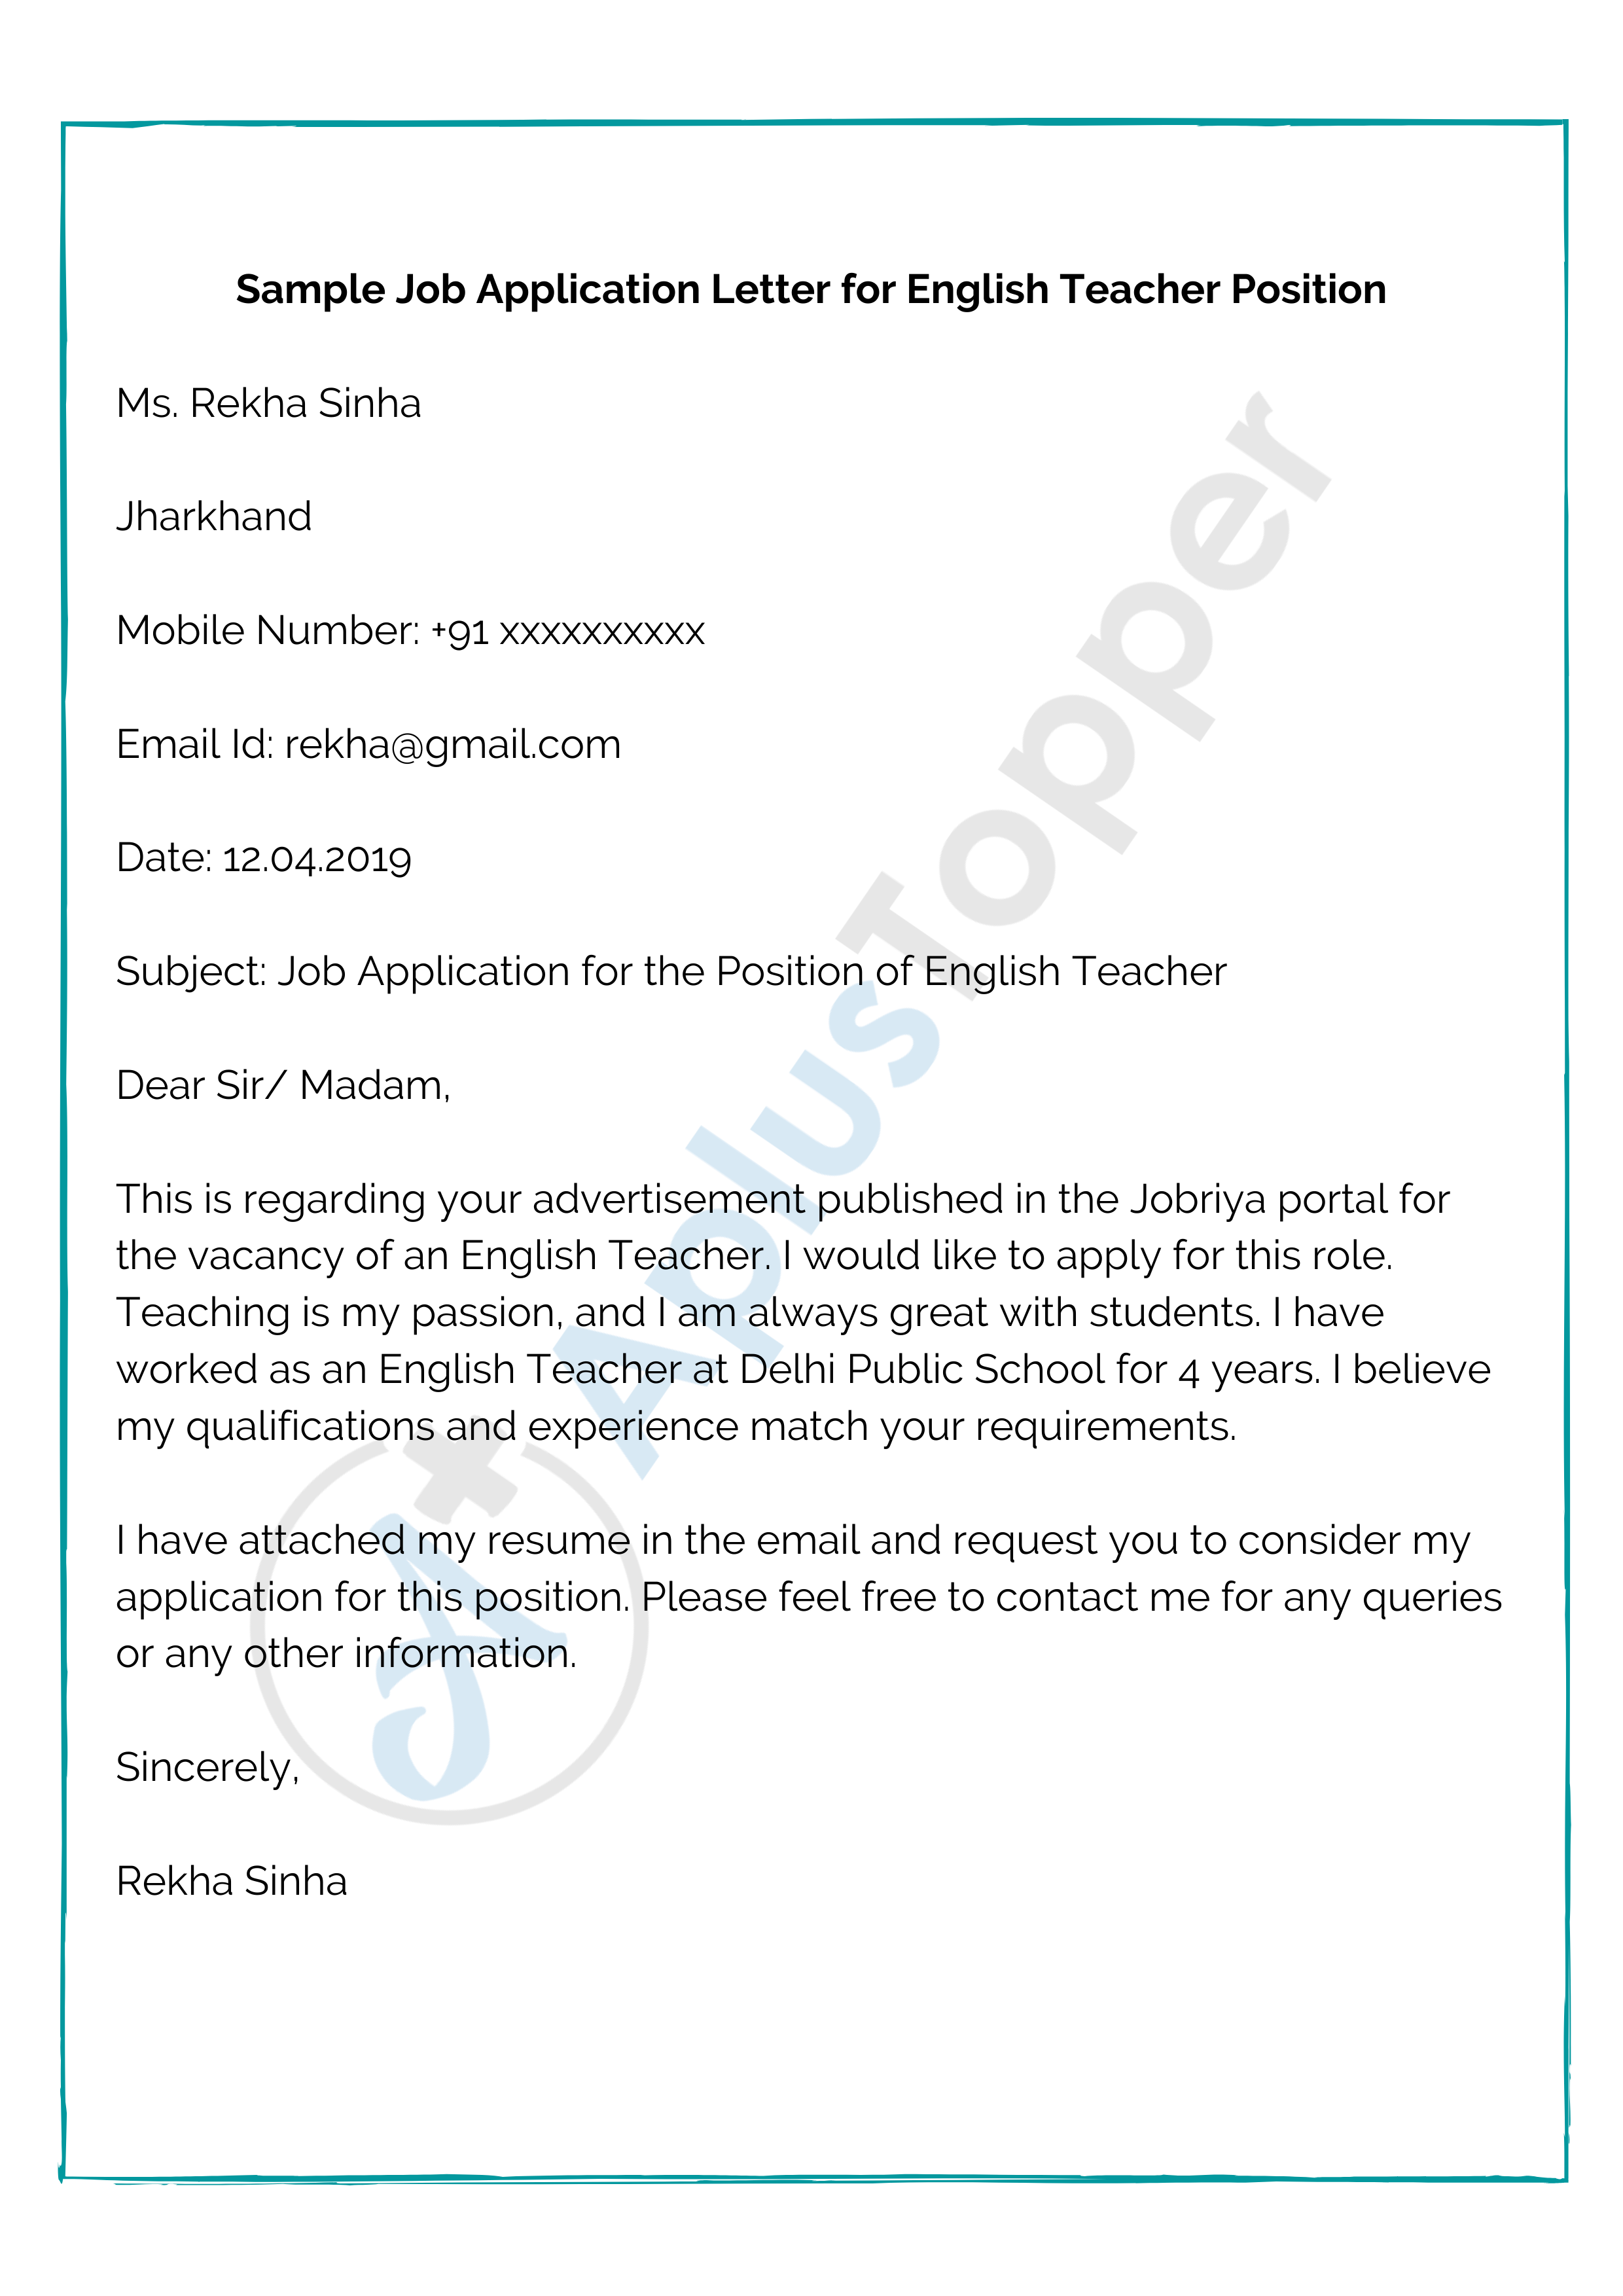 Job Application Letter | Format, Samples, How To Write A Job ...